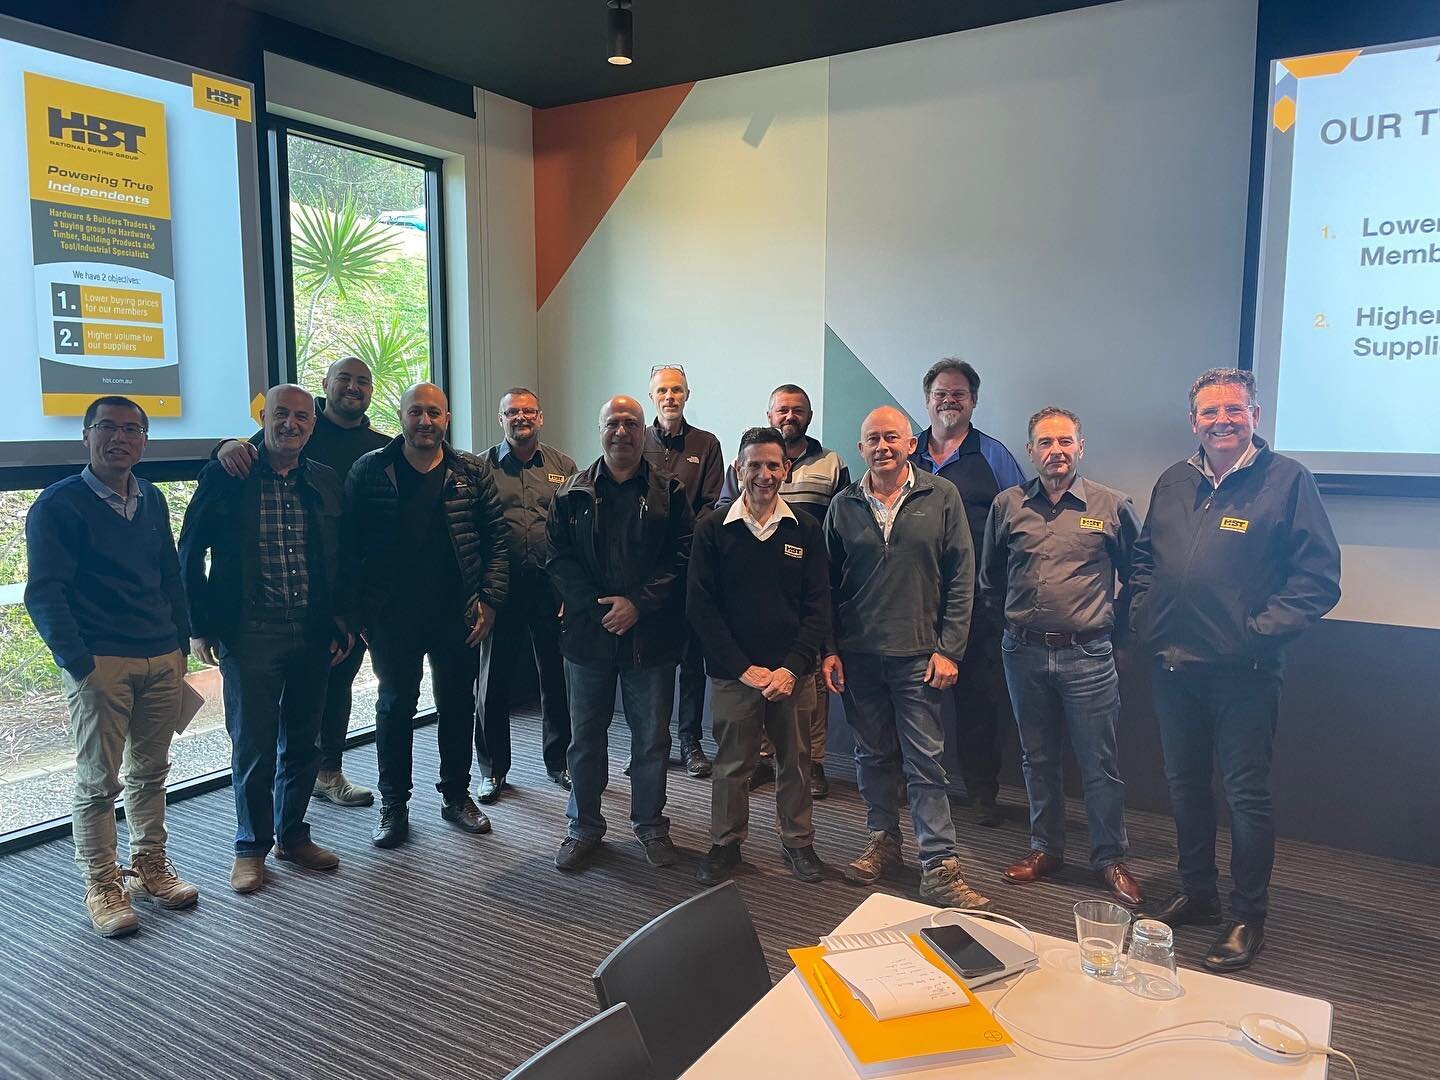 Last week our Members from NSW and the ACT got together for HBT State Meetings. The groups discussed their businesses and shared information on products and categories that are working well in their stores. We also had a fantastic turn out from our P